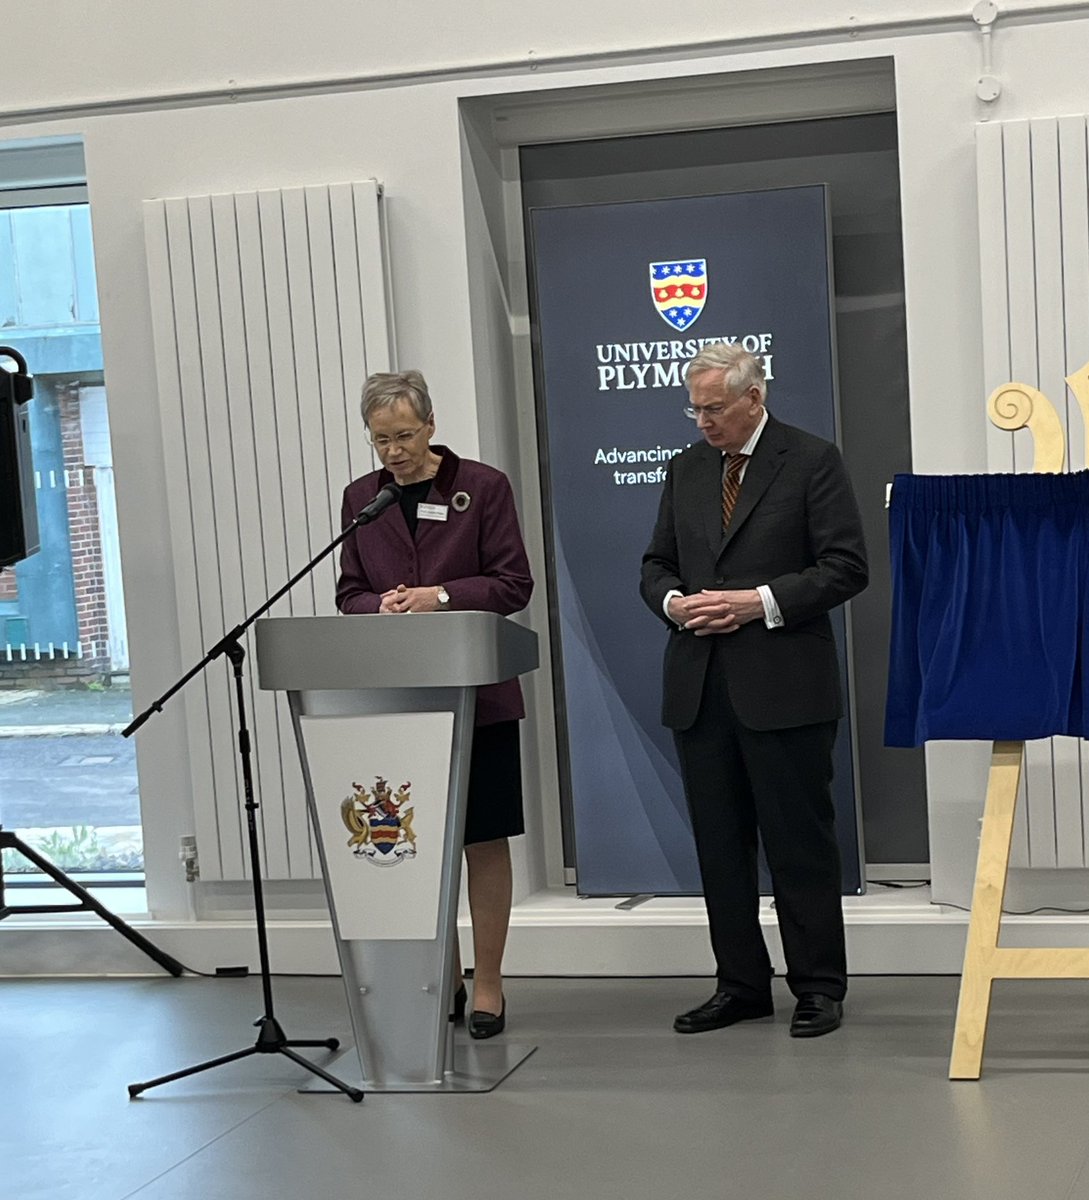 This was a great chance to show off the wonderful work being done by @PlymUni as HRH the Duke of Gloucester opened the Babbage Building for Engineering with the Vice Chancellor #JudithPetts. #Education #RoyalFamily